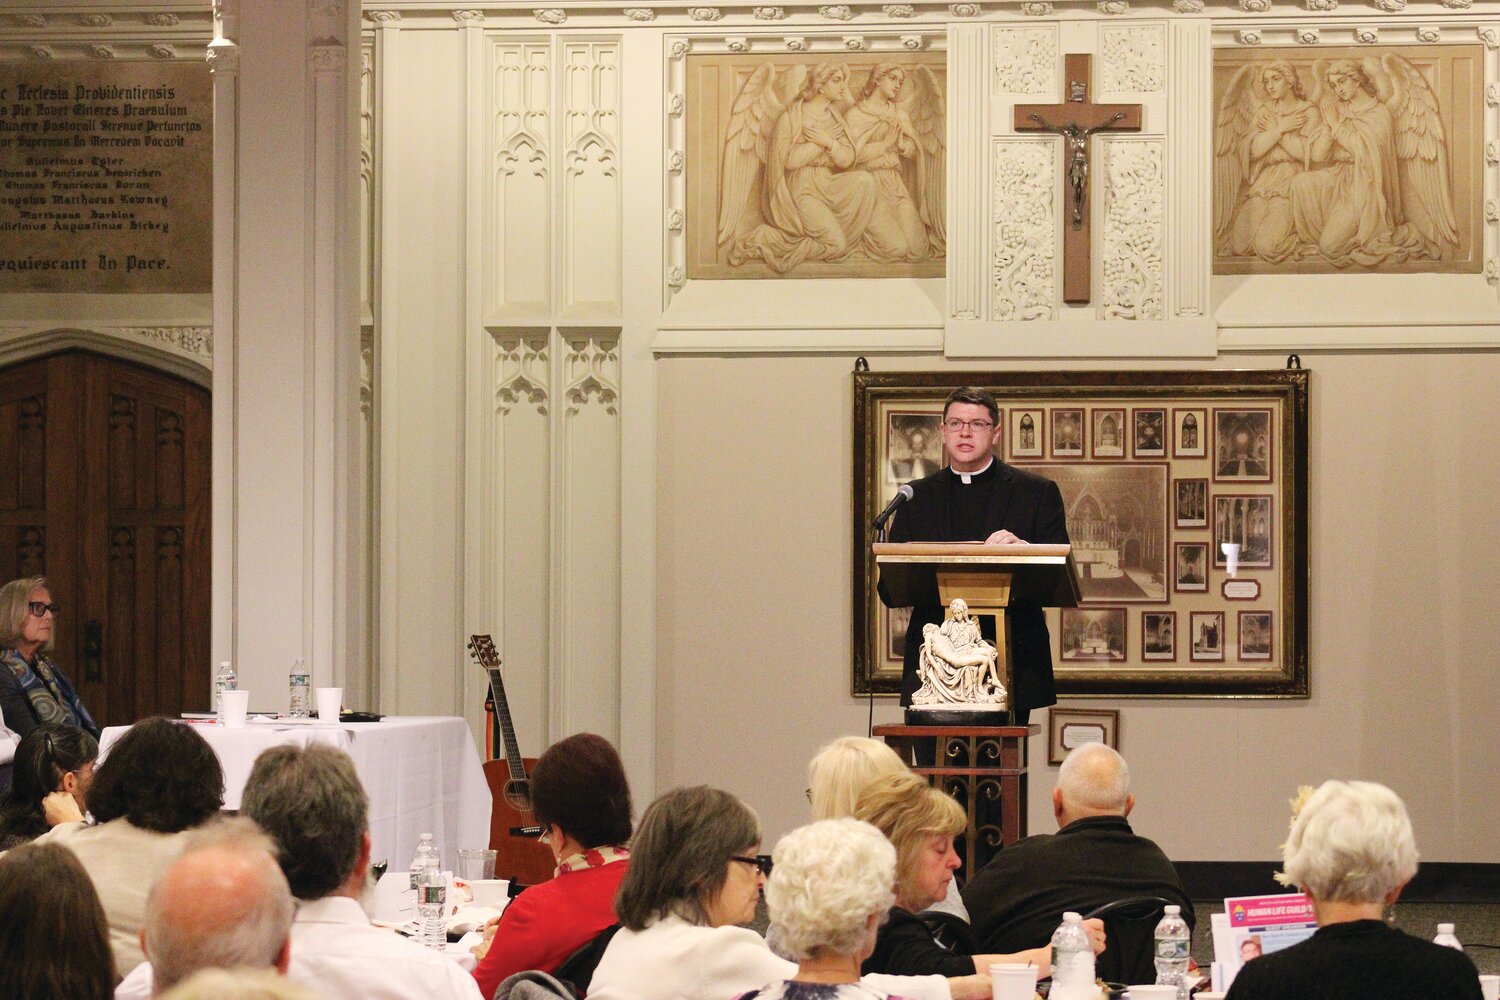 Speakers included Father Ryan W. Connors, Deacon Timothy P. Flanigan, M.D., and Dr. Sheila L. Kuzmic. The purpose of the Human Life Guild is to encourage membership of those who are willing to accept the invitation to be “People of Life,” to have an unconditional commitment to human life and to be willing to promote and defend human life at every stage, in every condition, through thought, word, deed and prayer.